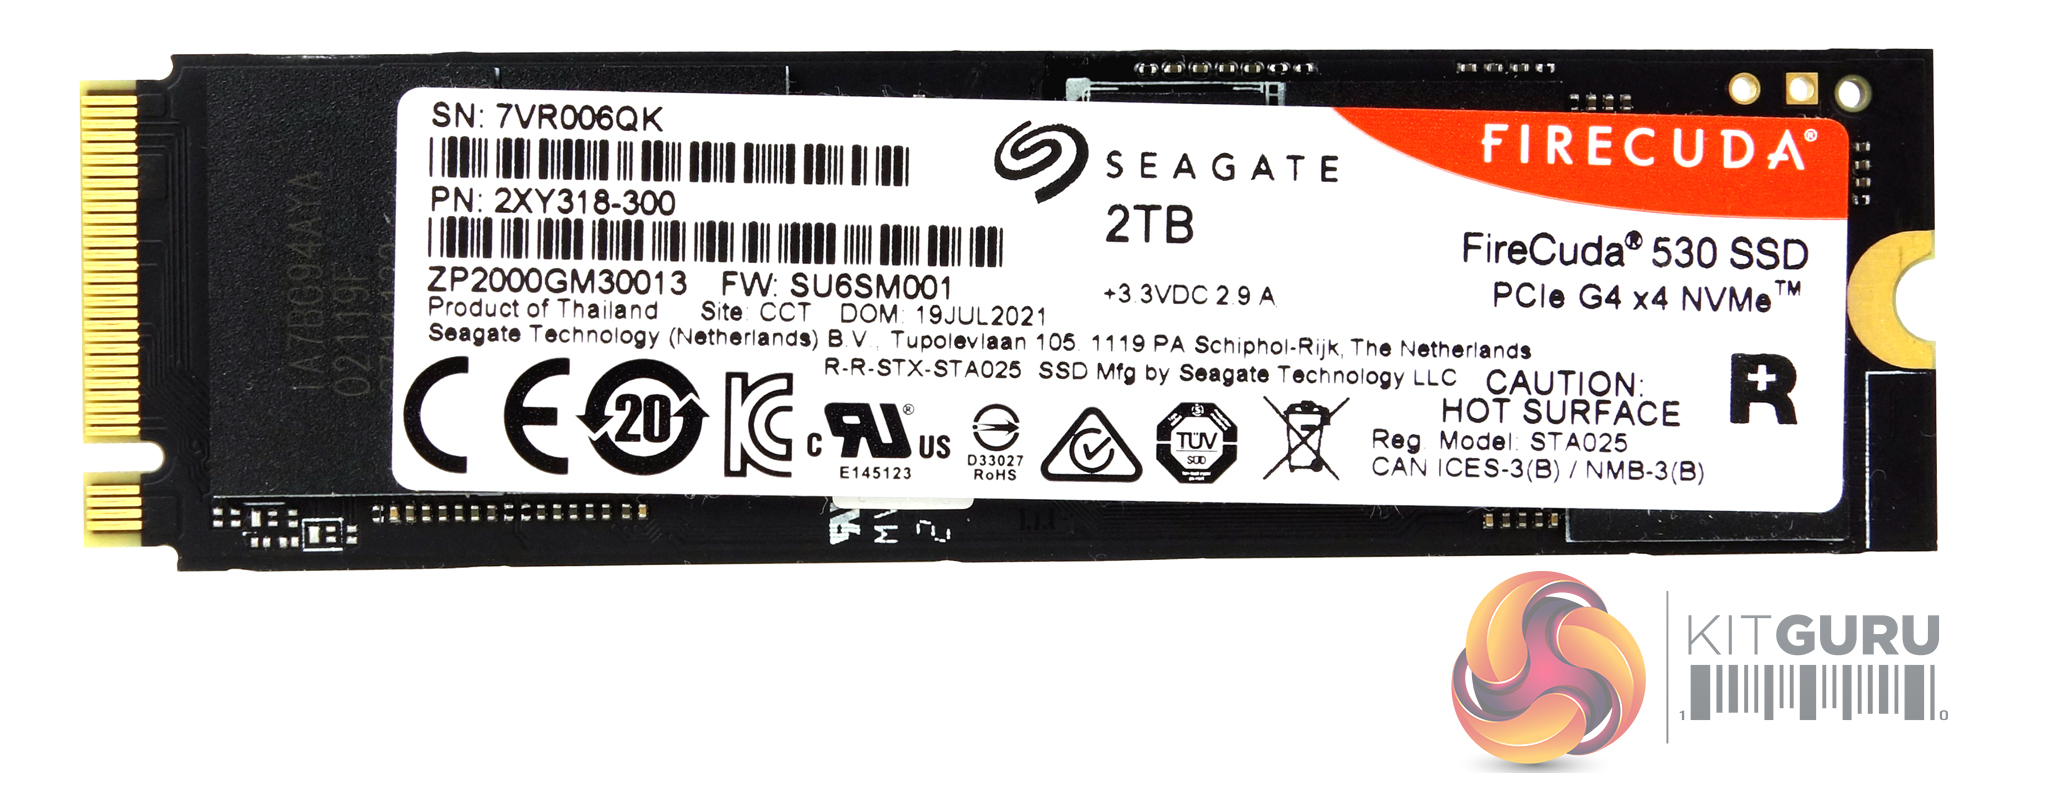 Seagate FireCuda 530 1TB SSD Review (tested with Windows 11)